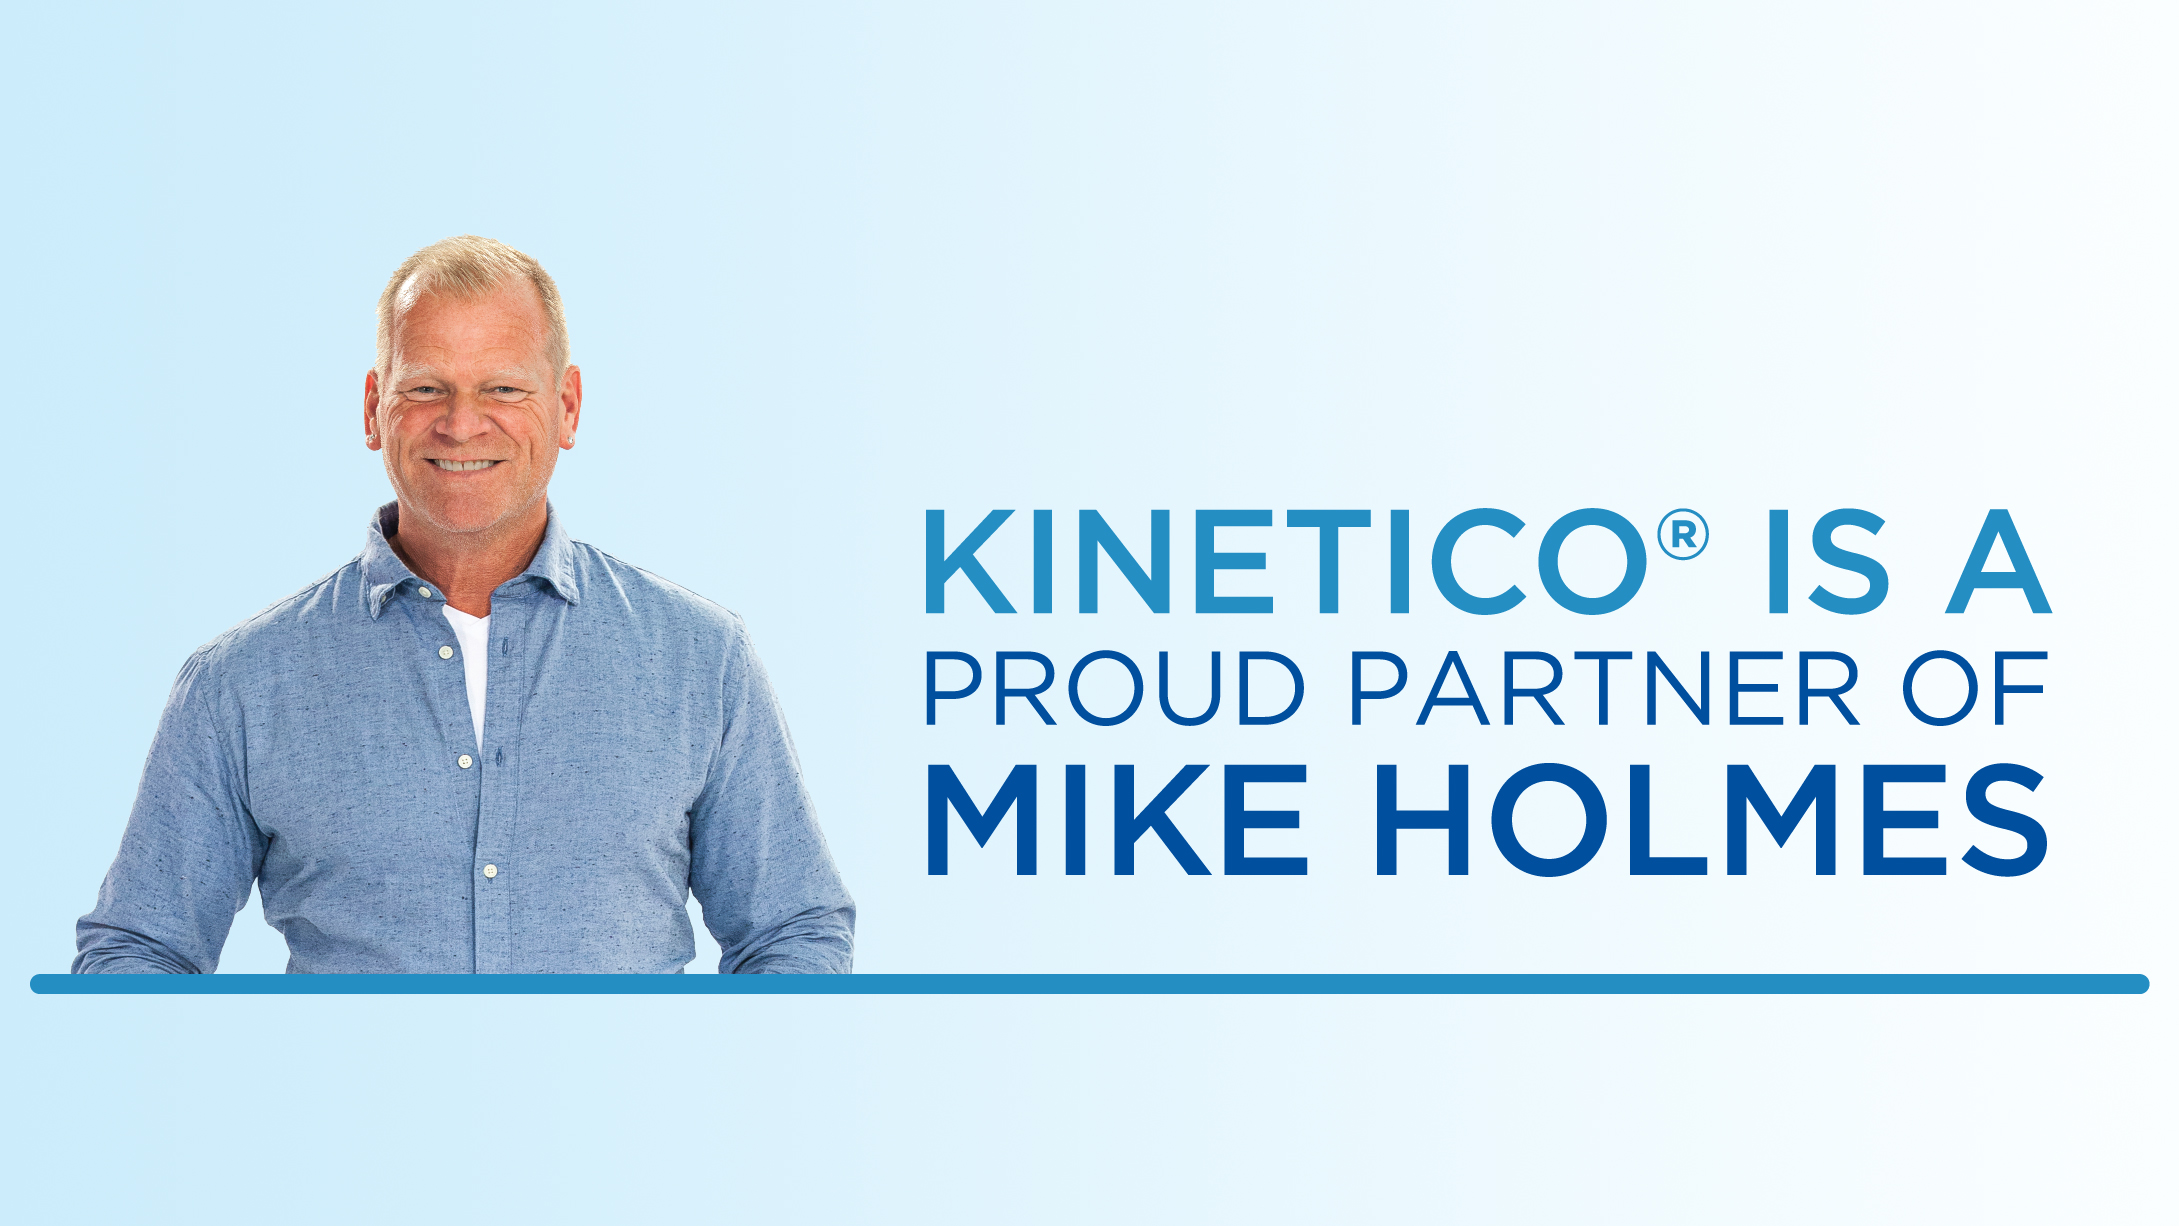 Mike Holmes Kinetico Water Filtration Systems